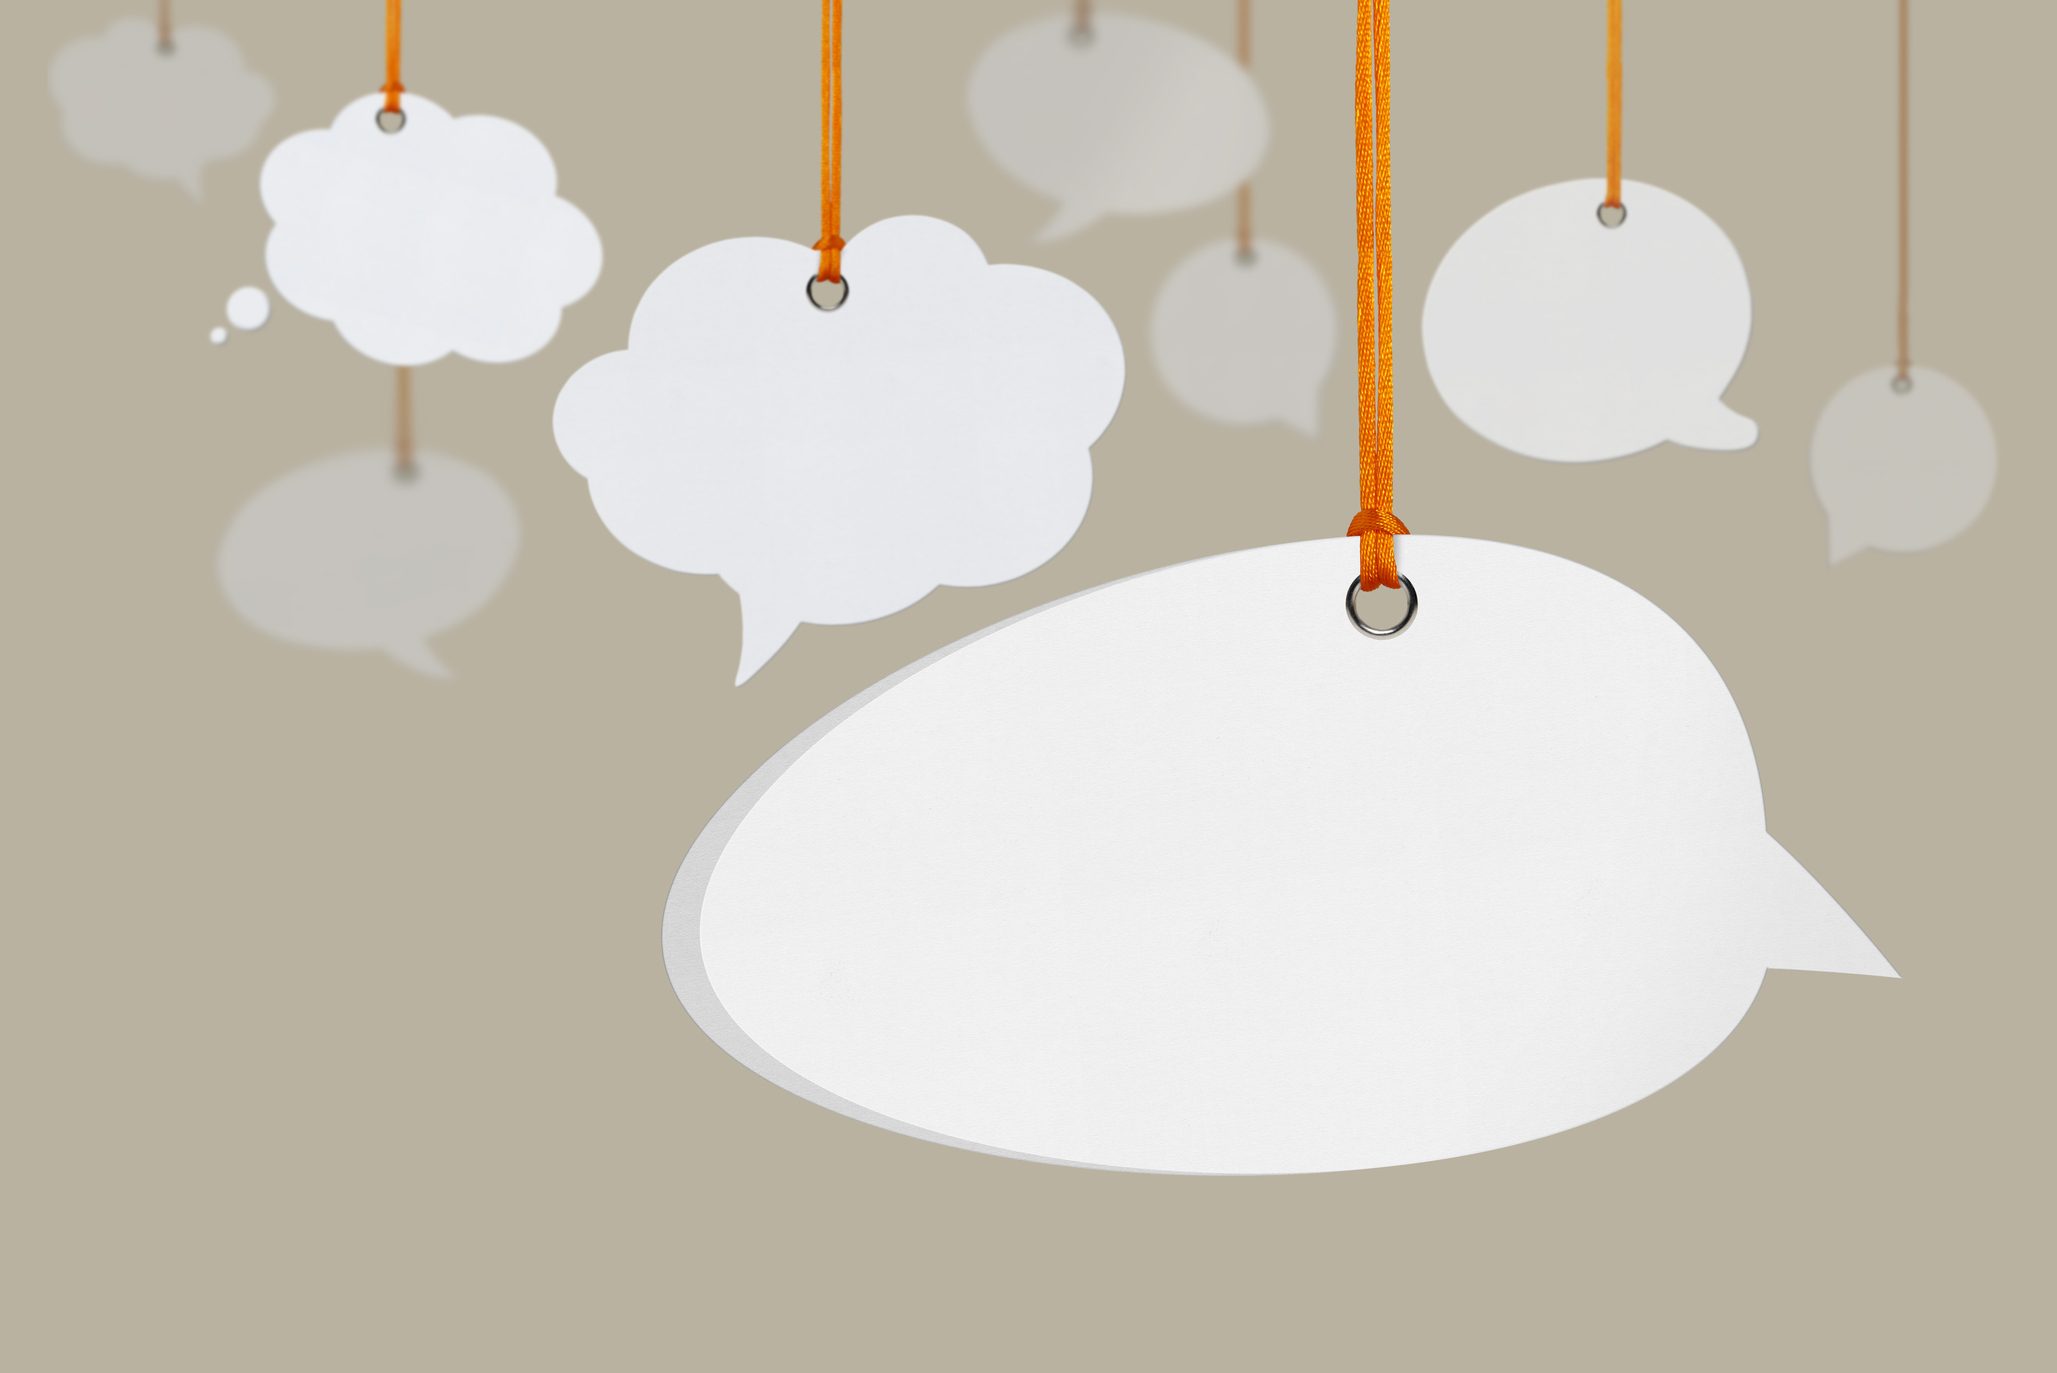 Hanging Speech Bubbles. (Getty Images)